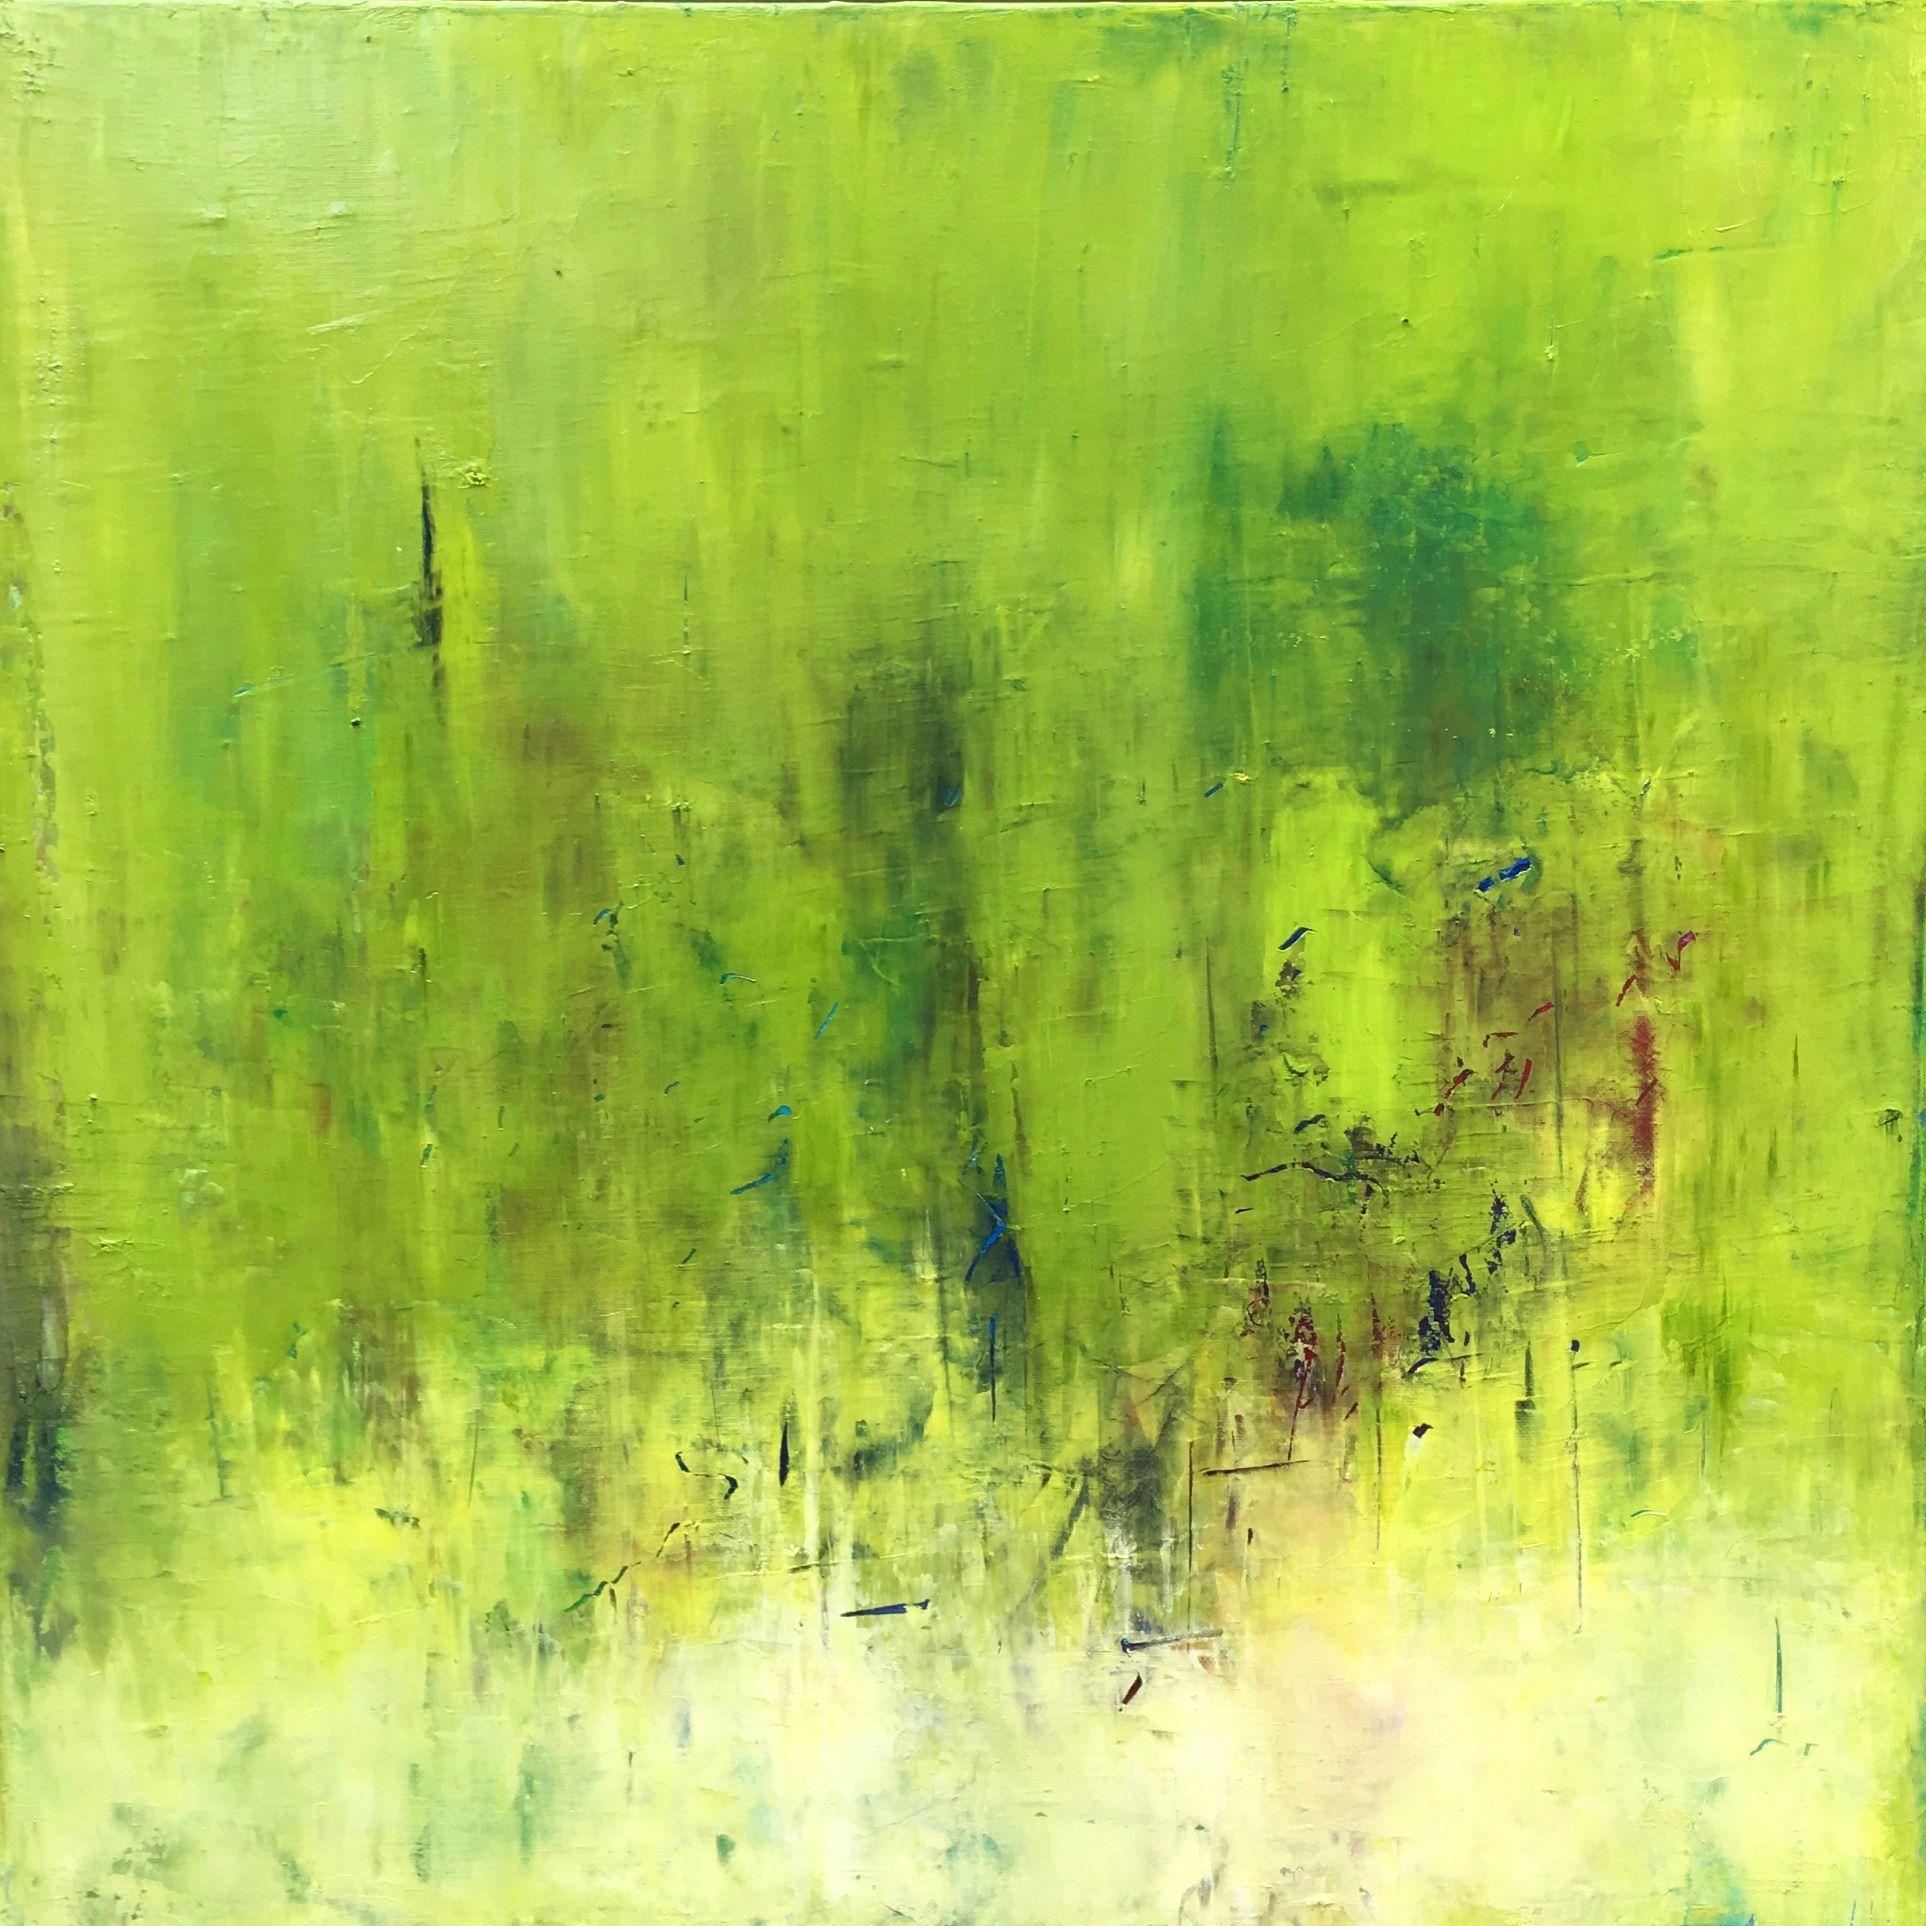 Angela Dierks Abstract Painting – The Light in Spring, Painting, Oil on Canvas